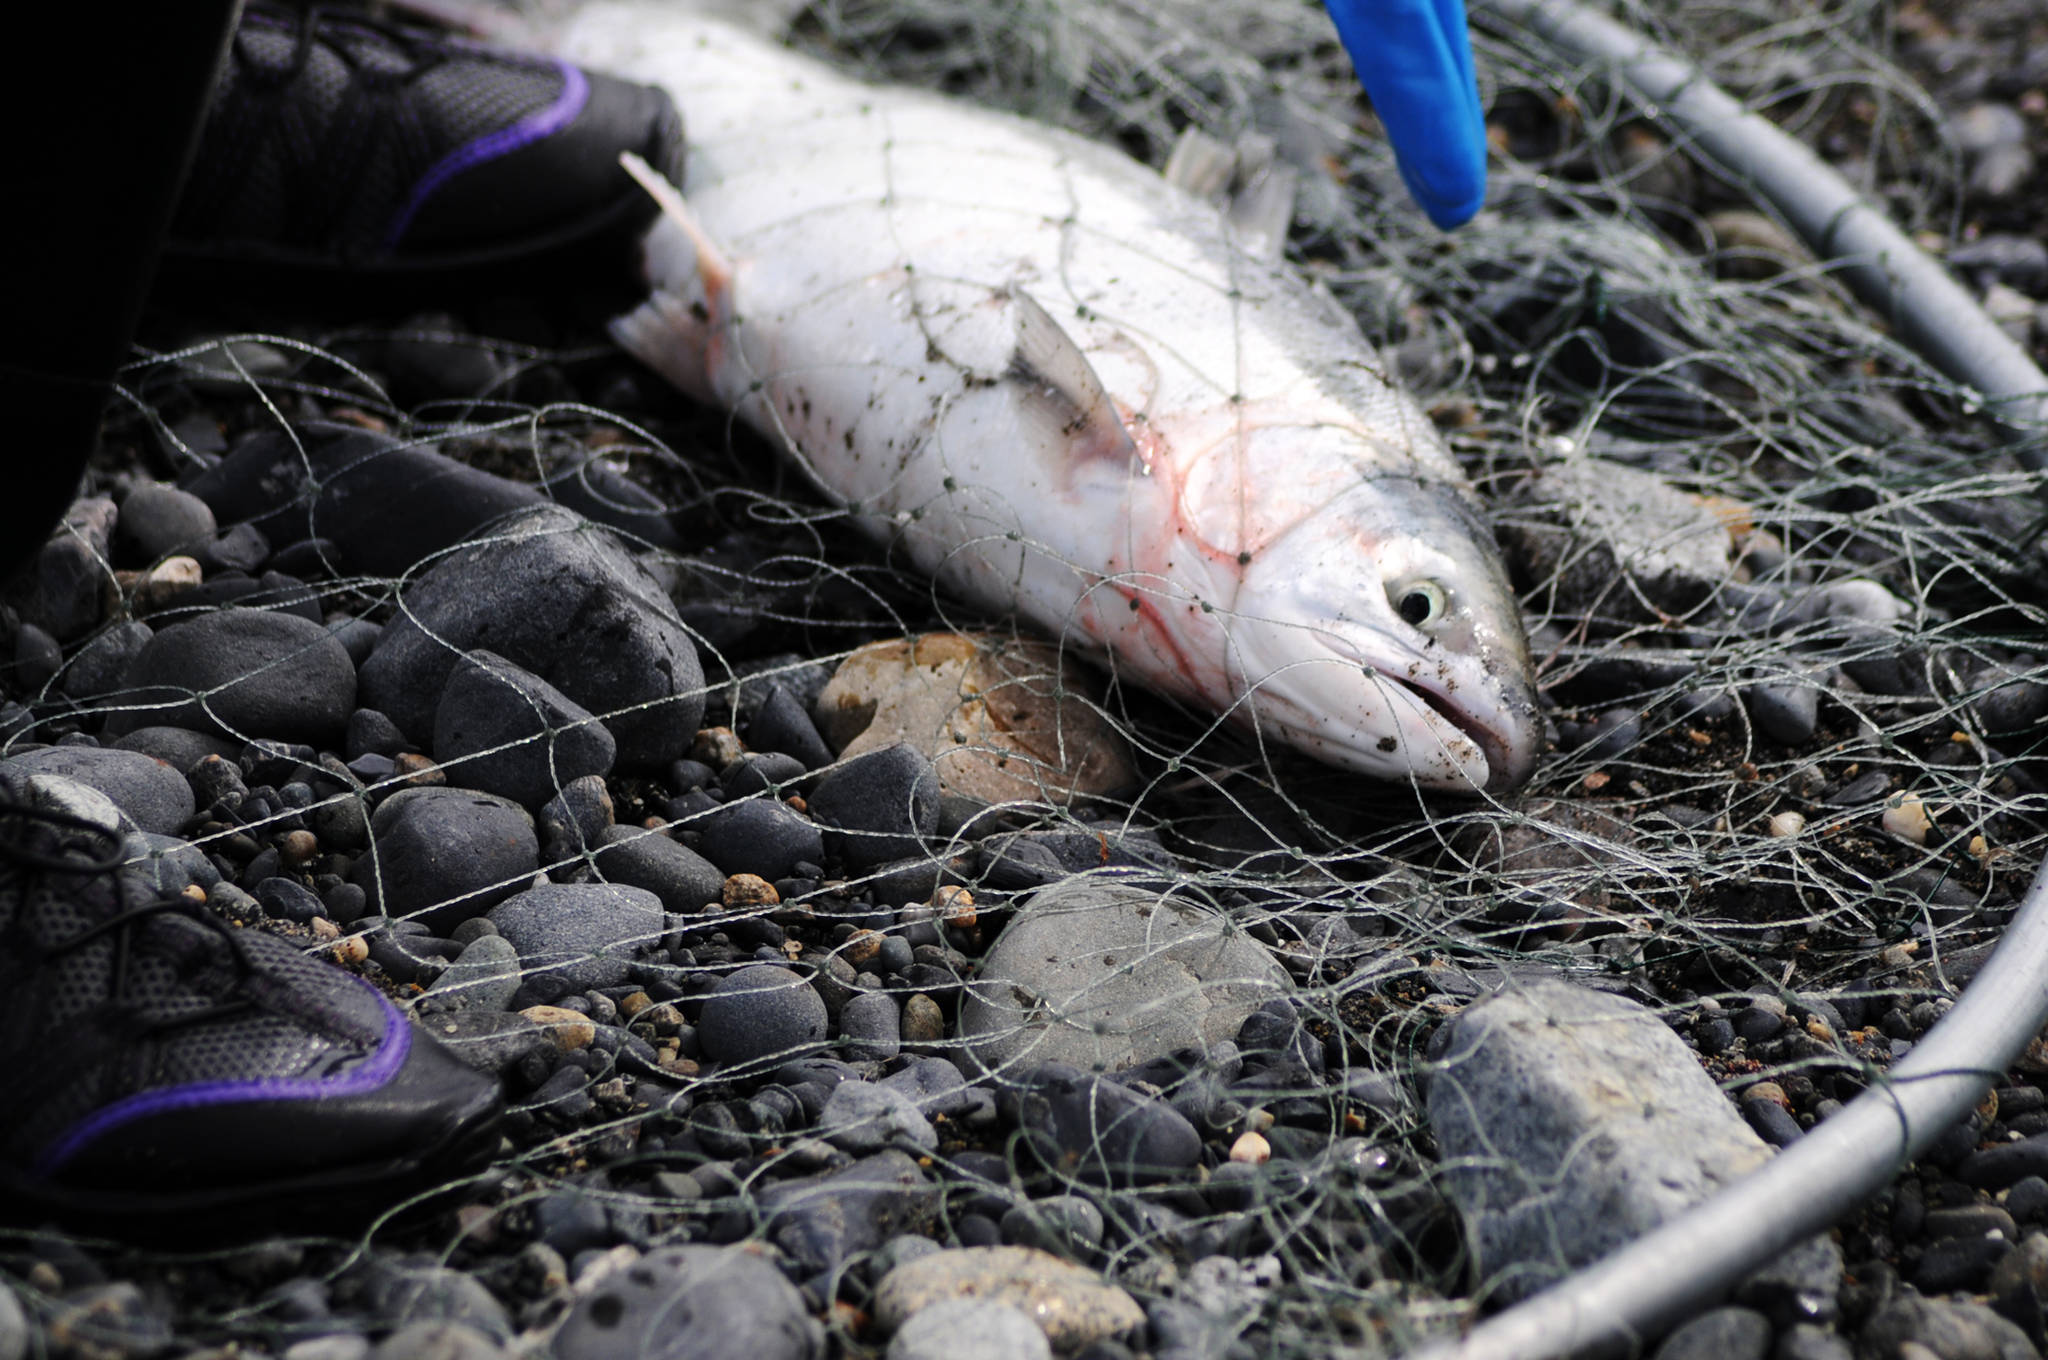 A dipnetter reaches to retrieve a sockeye salmon caught in her net on the Kenai Beach on Tuesday, July 11, 2017 in Kenai, Alaska. Tuesday was the second day of the Kenai River personal-use dipnet fishery, which will remain open until July 31. The fishery was relatively quiet Tuesday, with a dipnetter hauling in a fish every once in awhile, and unlike many July weekends, there was plenty of room in the water for more participants. Sockeye salmon have been relatively slow to enter the Kenai this year, with about 94,885 past the Alaska Department of Fish and Game’s sonar as of Monday, significantly less than in 2016 but ahead of years like 2013, 2012 and 2011, according to Fish and Game data. (Photo by Elizabeth Earl/Peninsula Clarion)